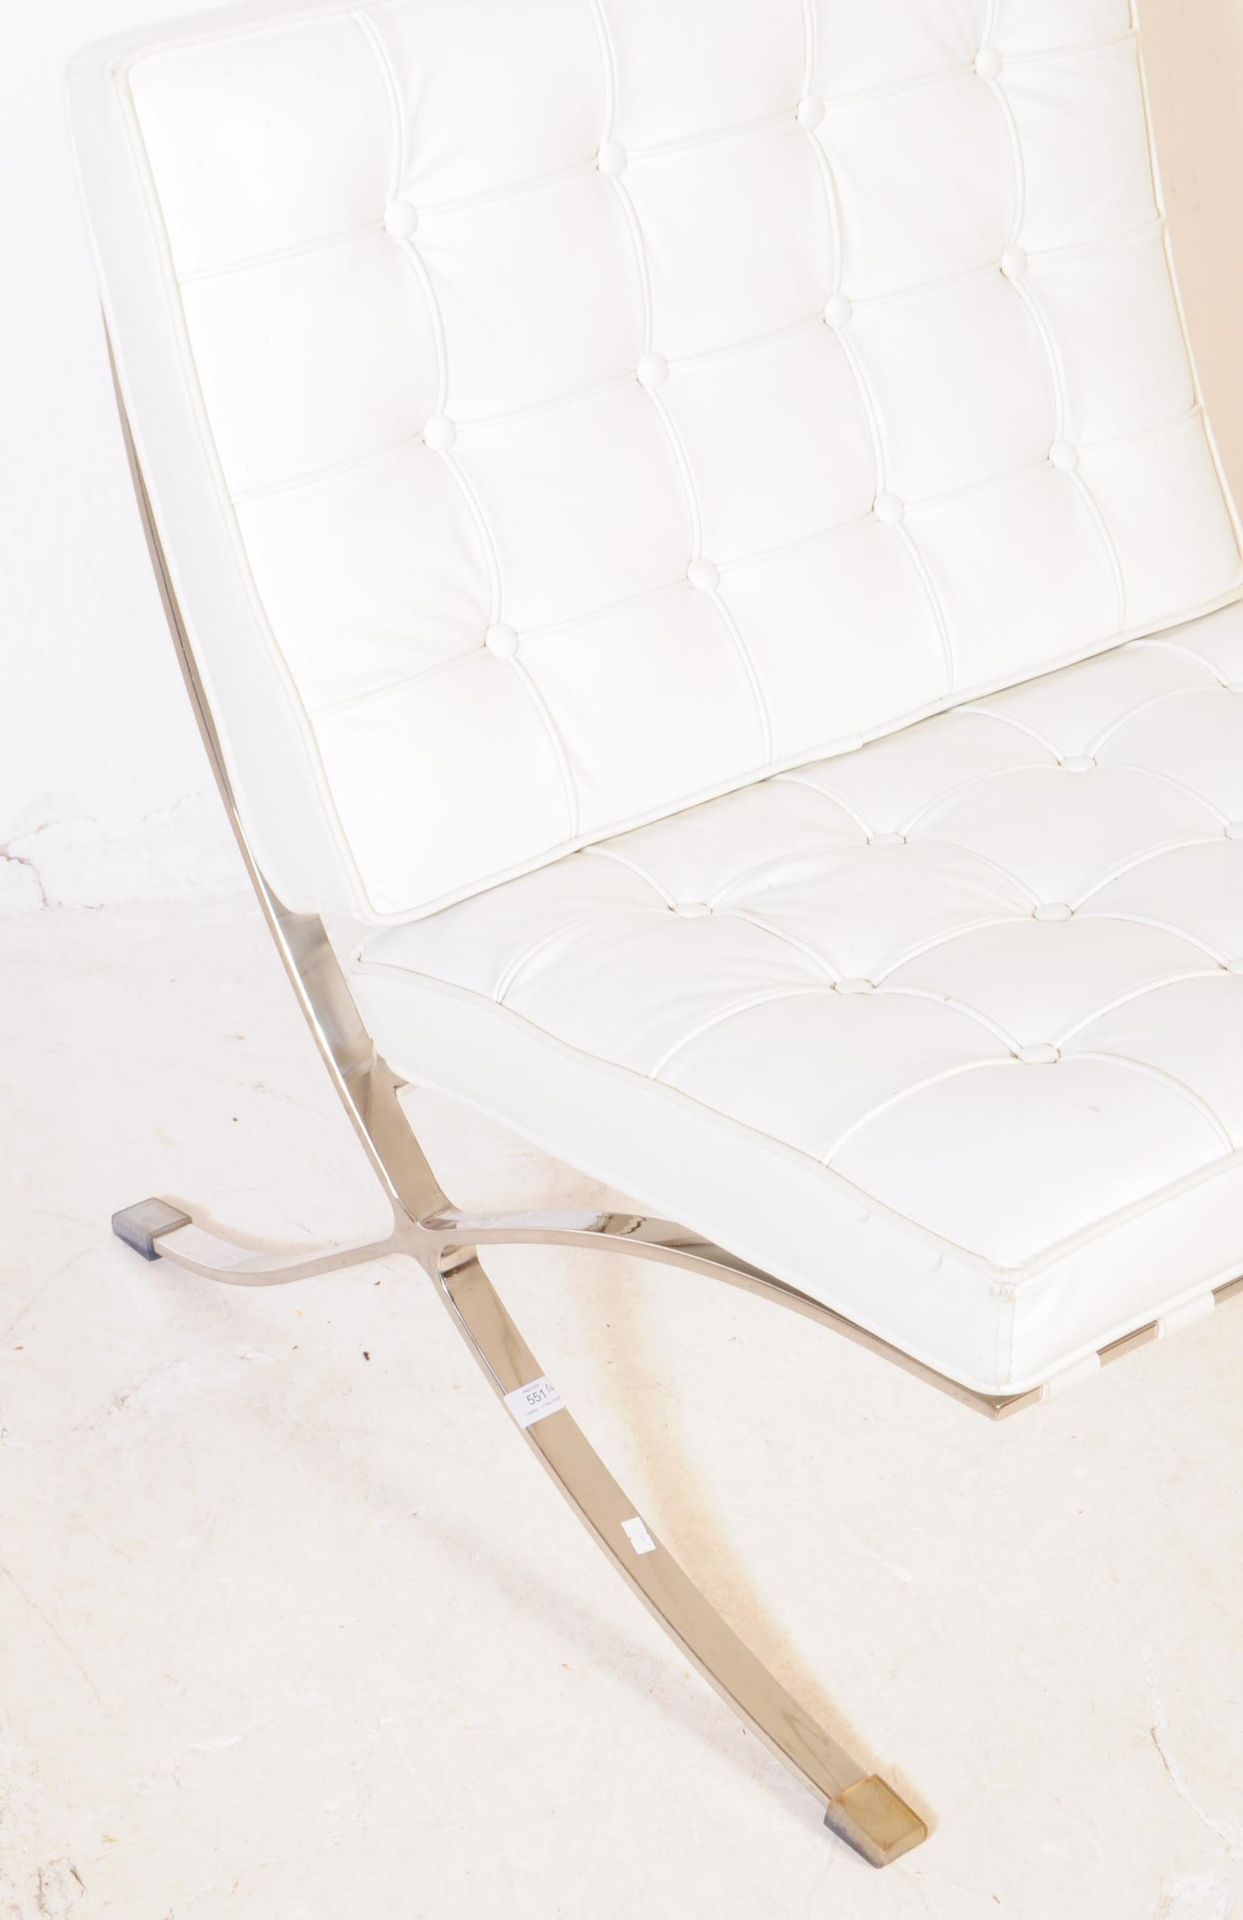 CONTEMPORARY WHITE LEATHERETTE BARCELONA CHAIR - Image 2 of 3